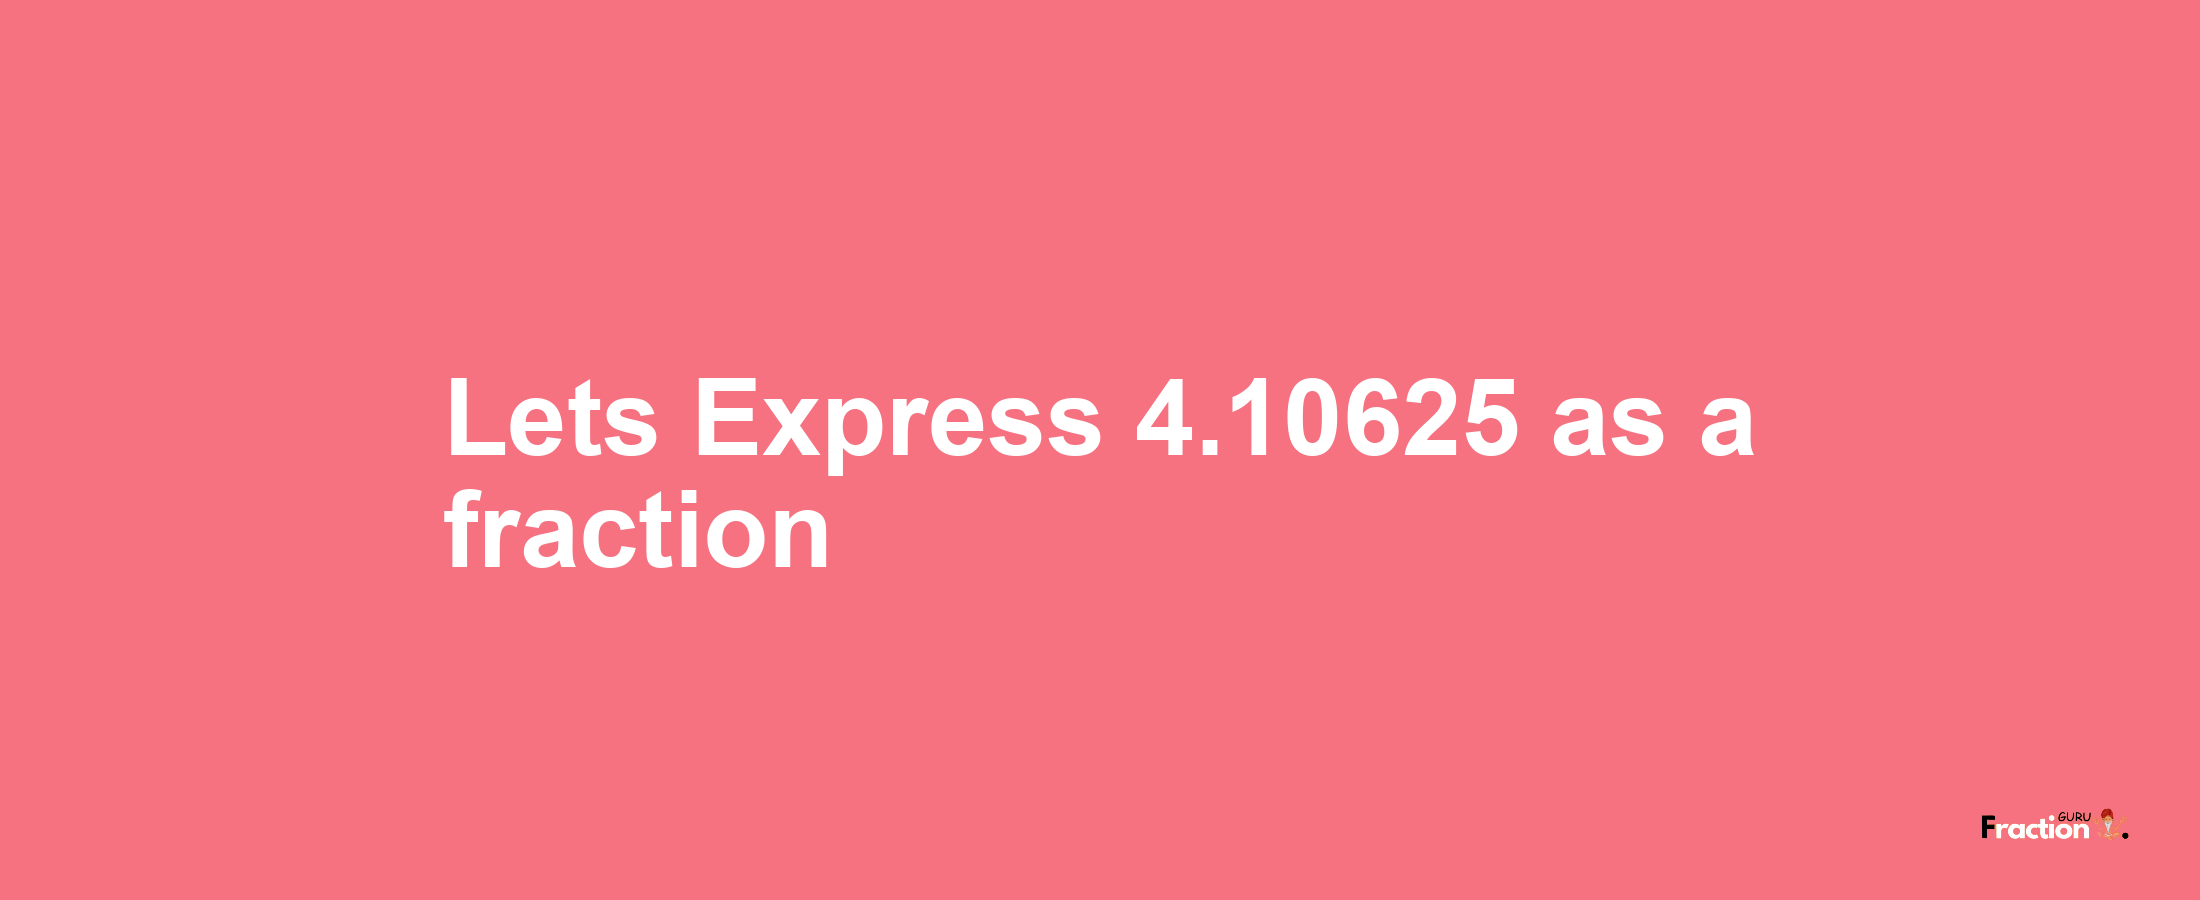 Lets Express 4.10625 as afraction